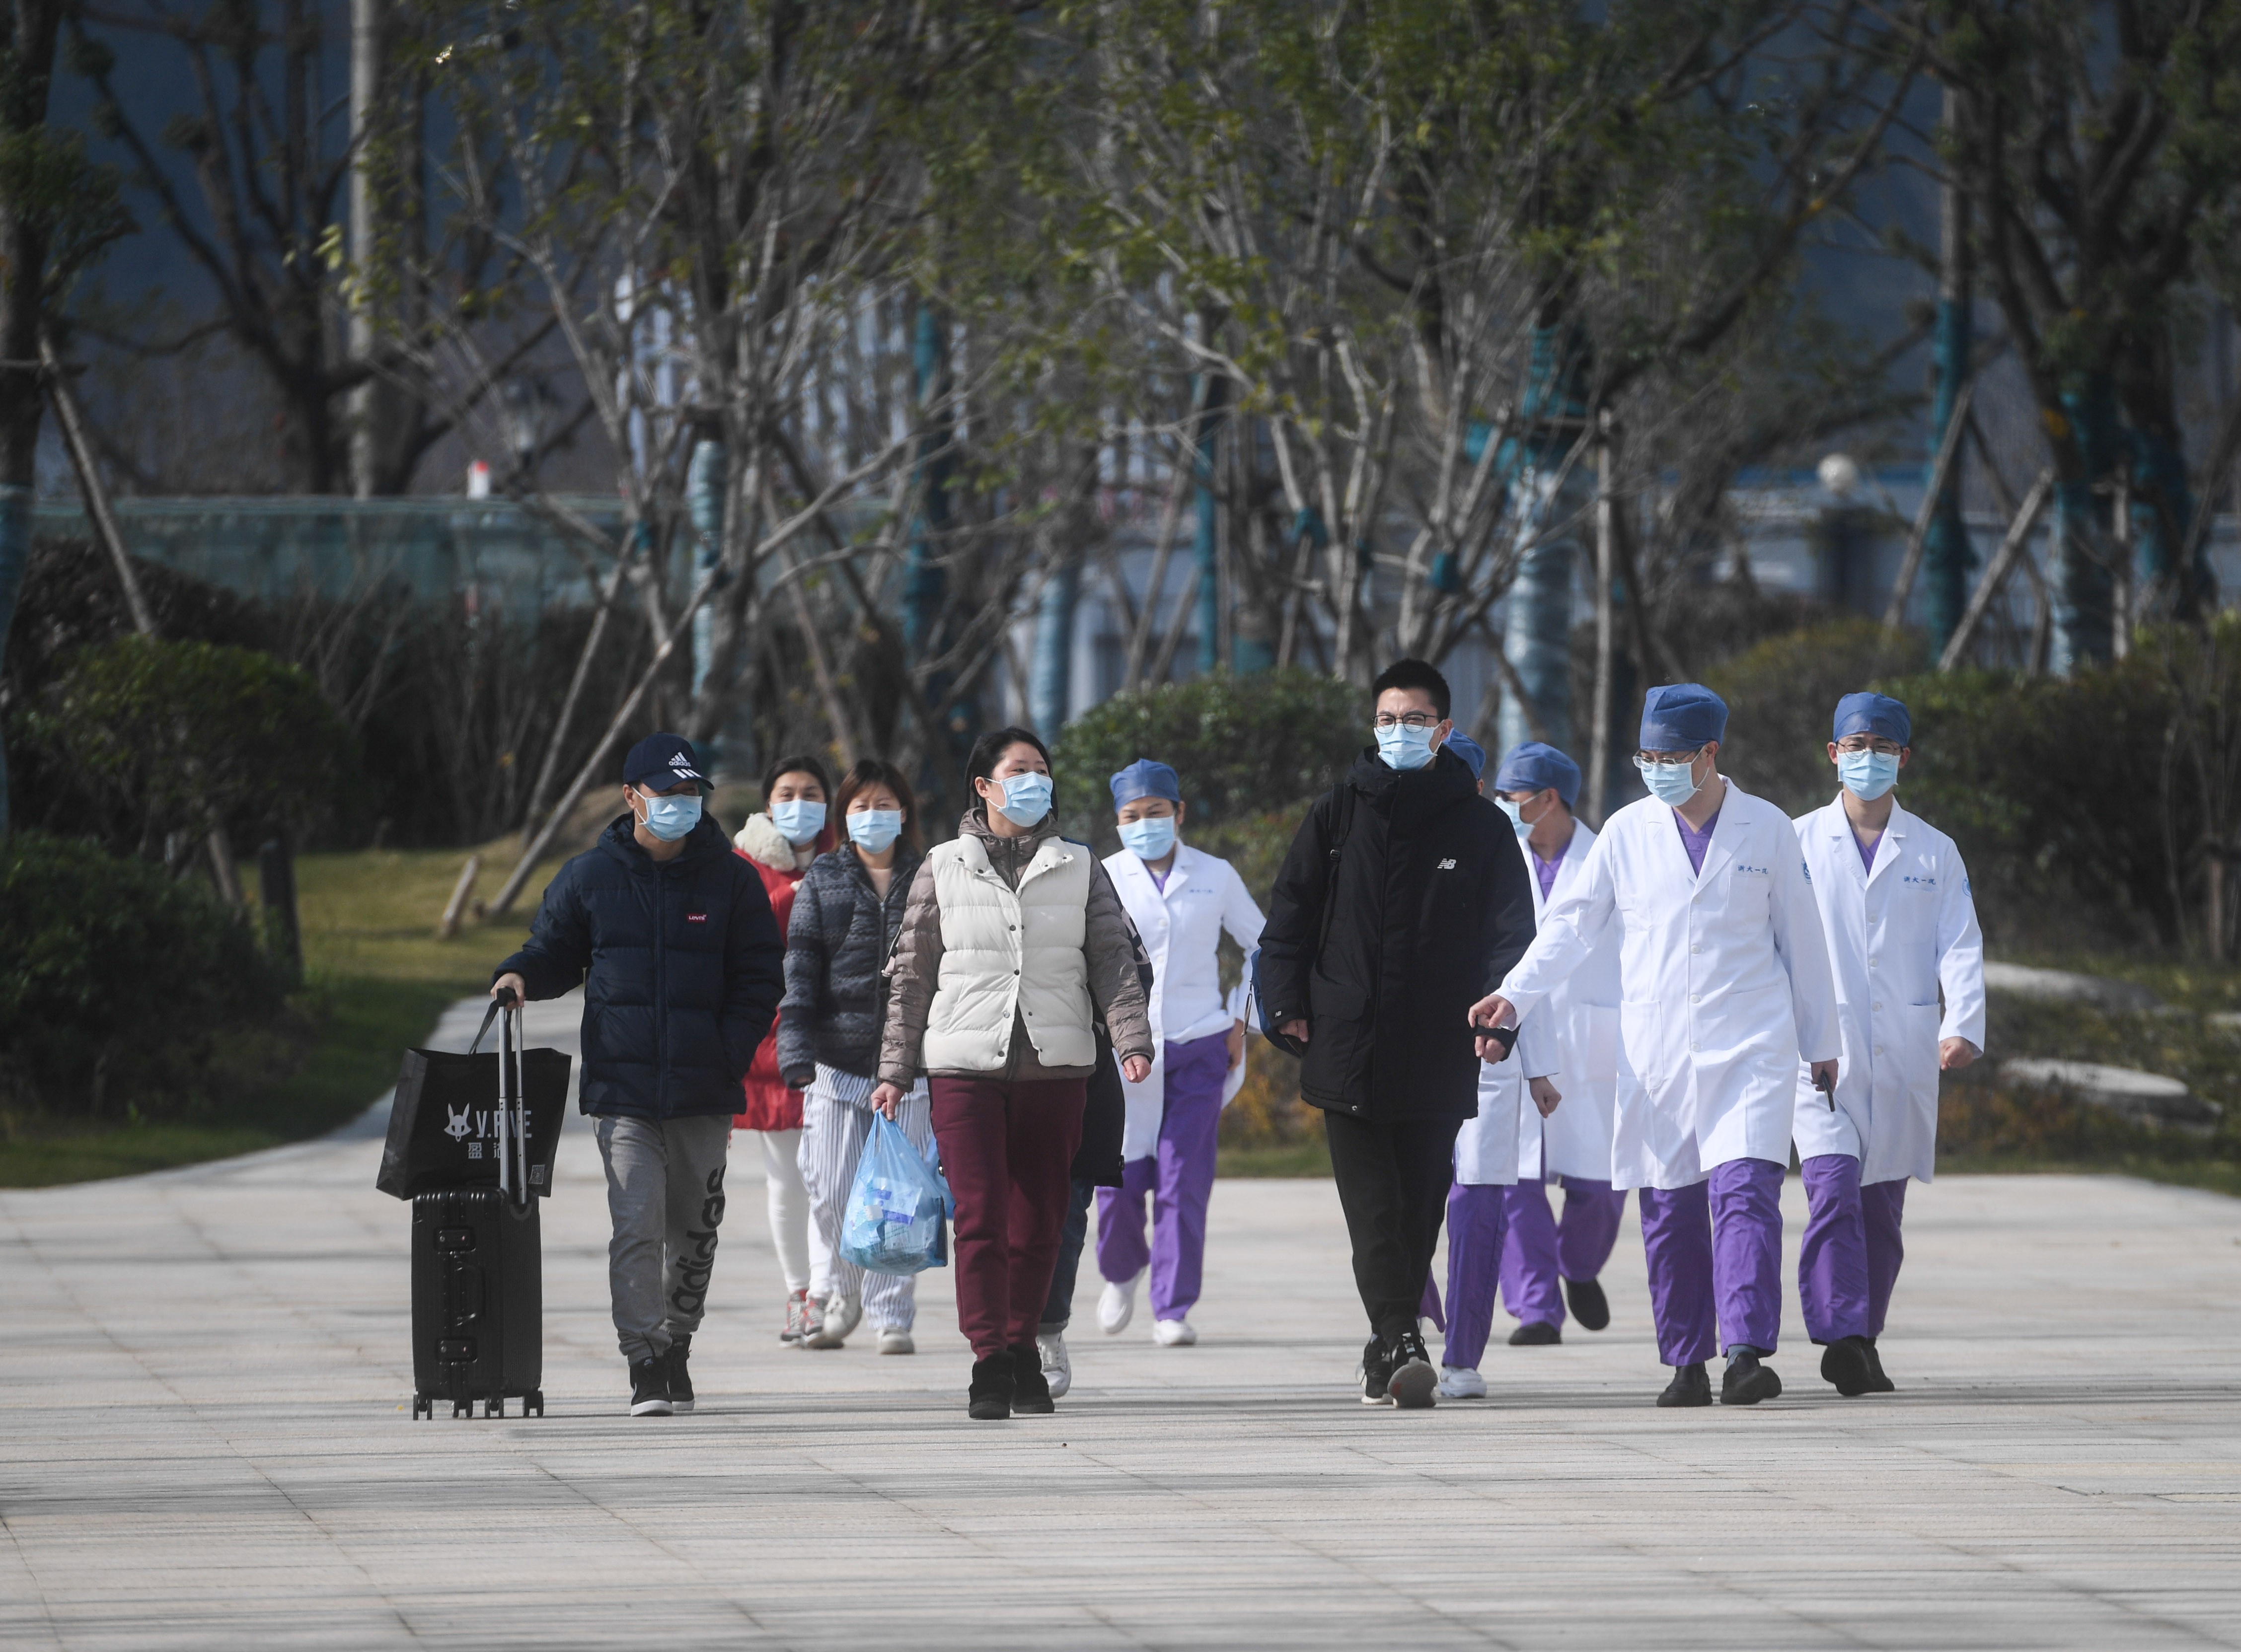 Cured coronavirus patients leave hospital in Hangzhou, one of four cities in the eastern Chinese province of Zhejiang which has adopted draconian quarantine measures for its residents. Photo: Xinhua